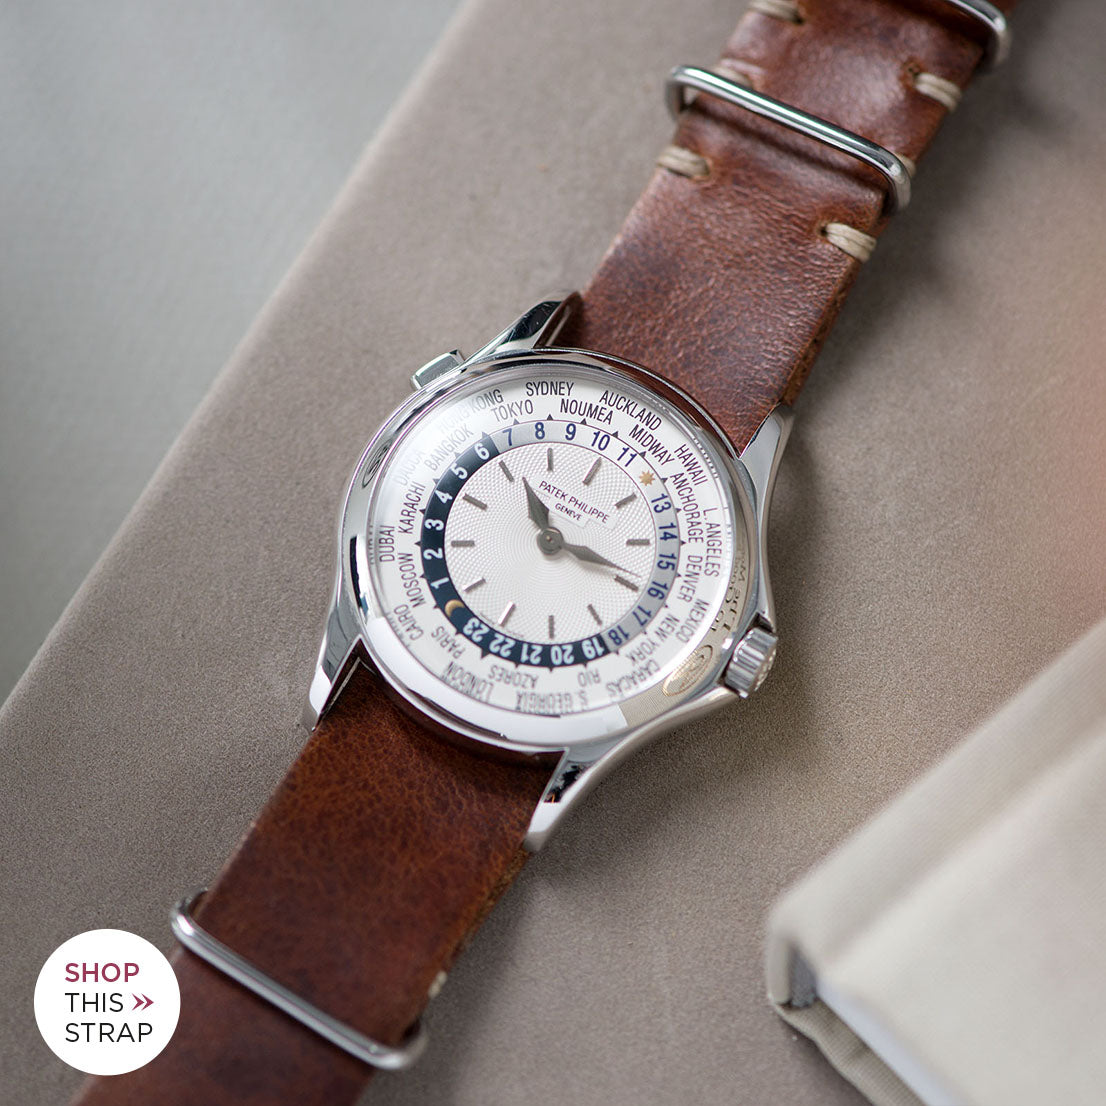 Bulang and Sons_Strap Guide _Patek Philippe 5110G White Gold World Time_Siena Brown Nato Leather Watch Strap